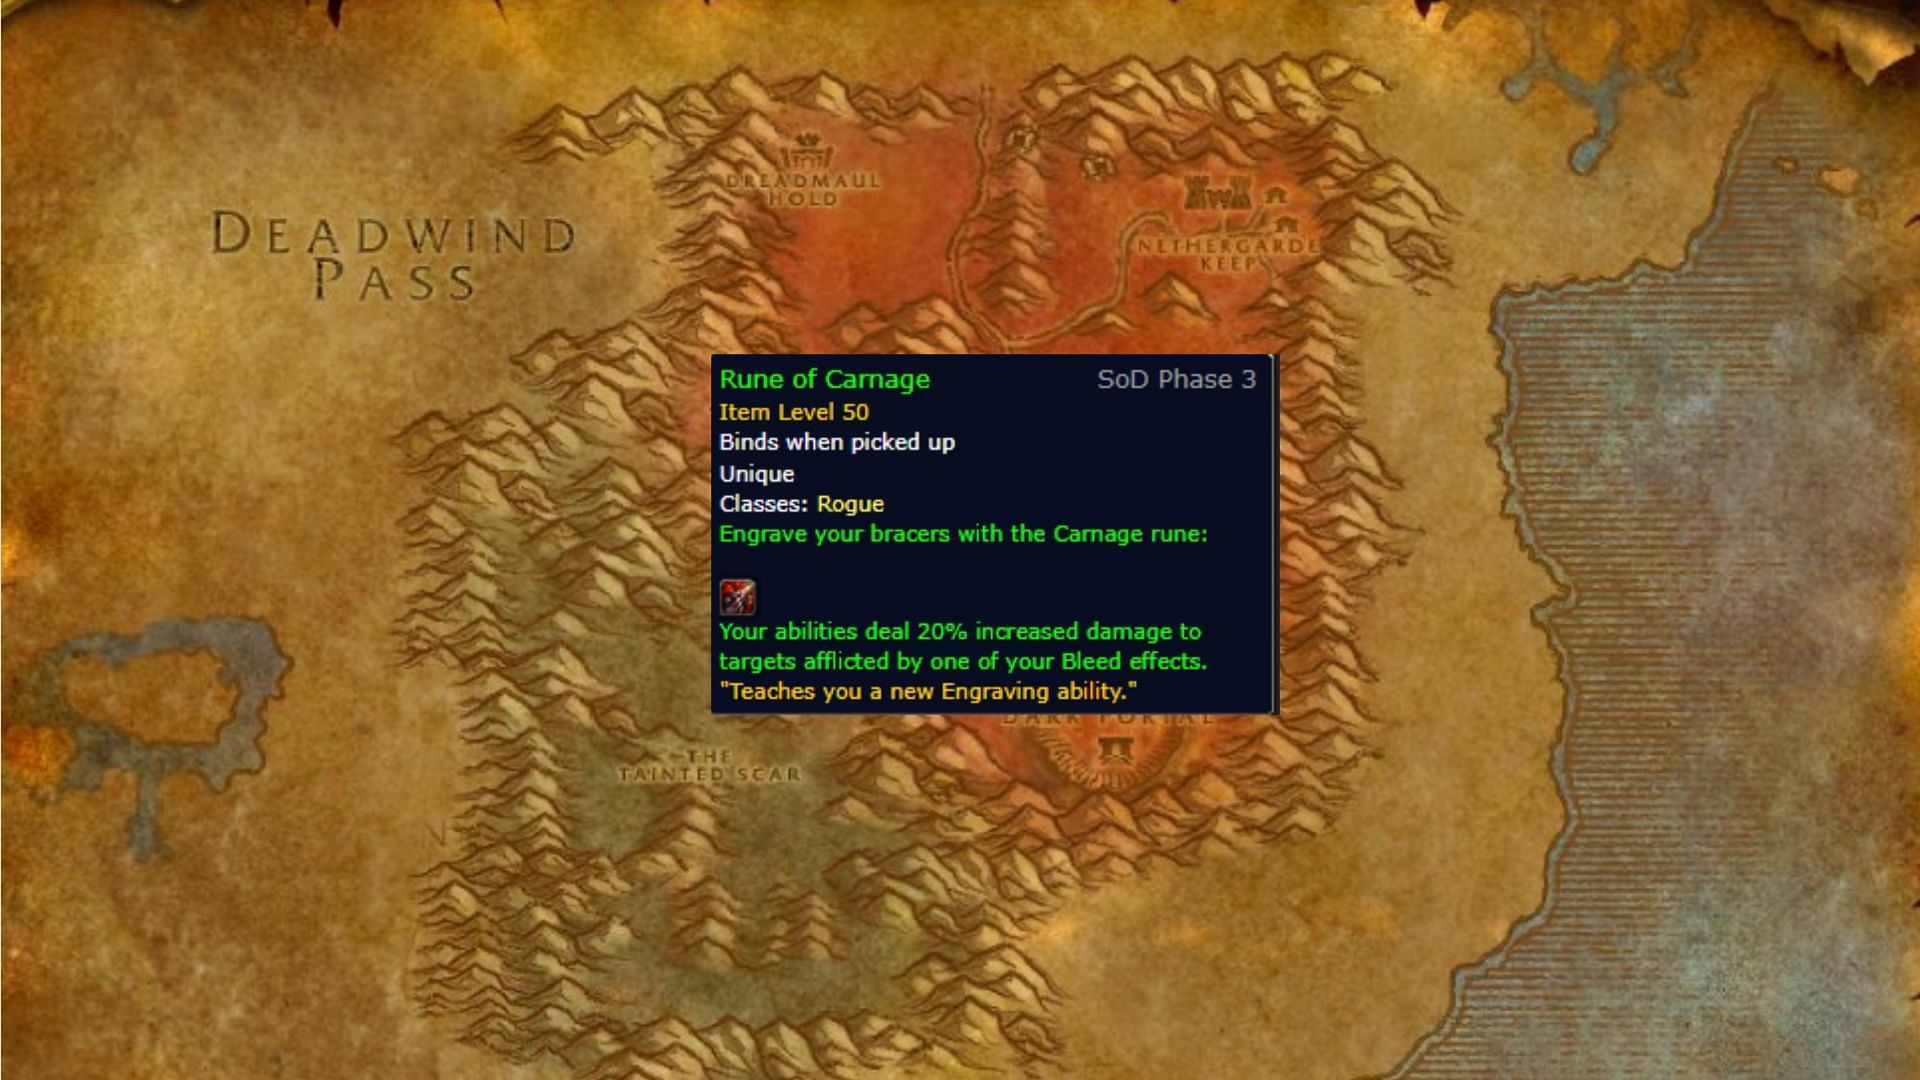 The Carnage Rune for WoW Classic SoD Phase 3 for Rogues (Image via Blizzard Entertainment)